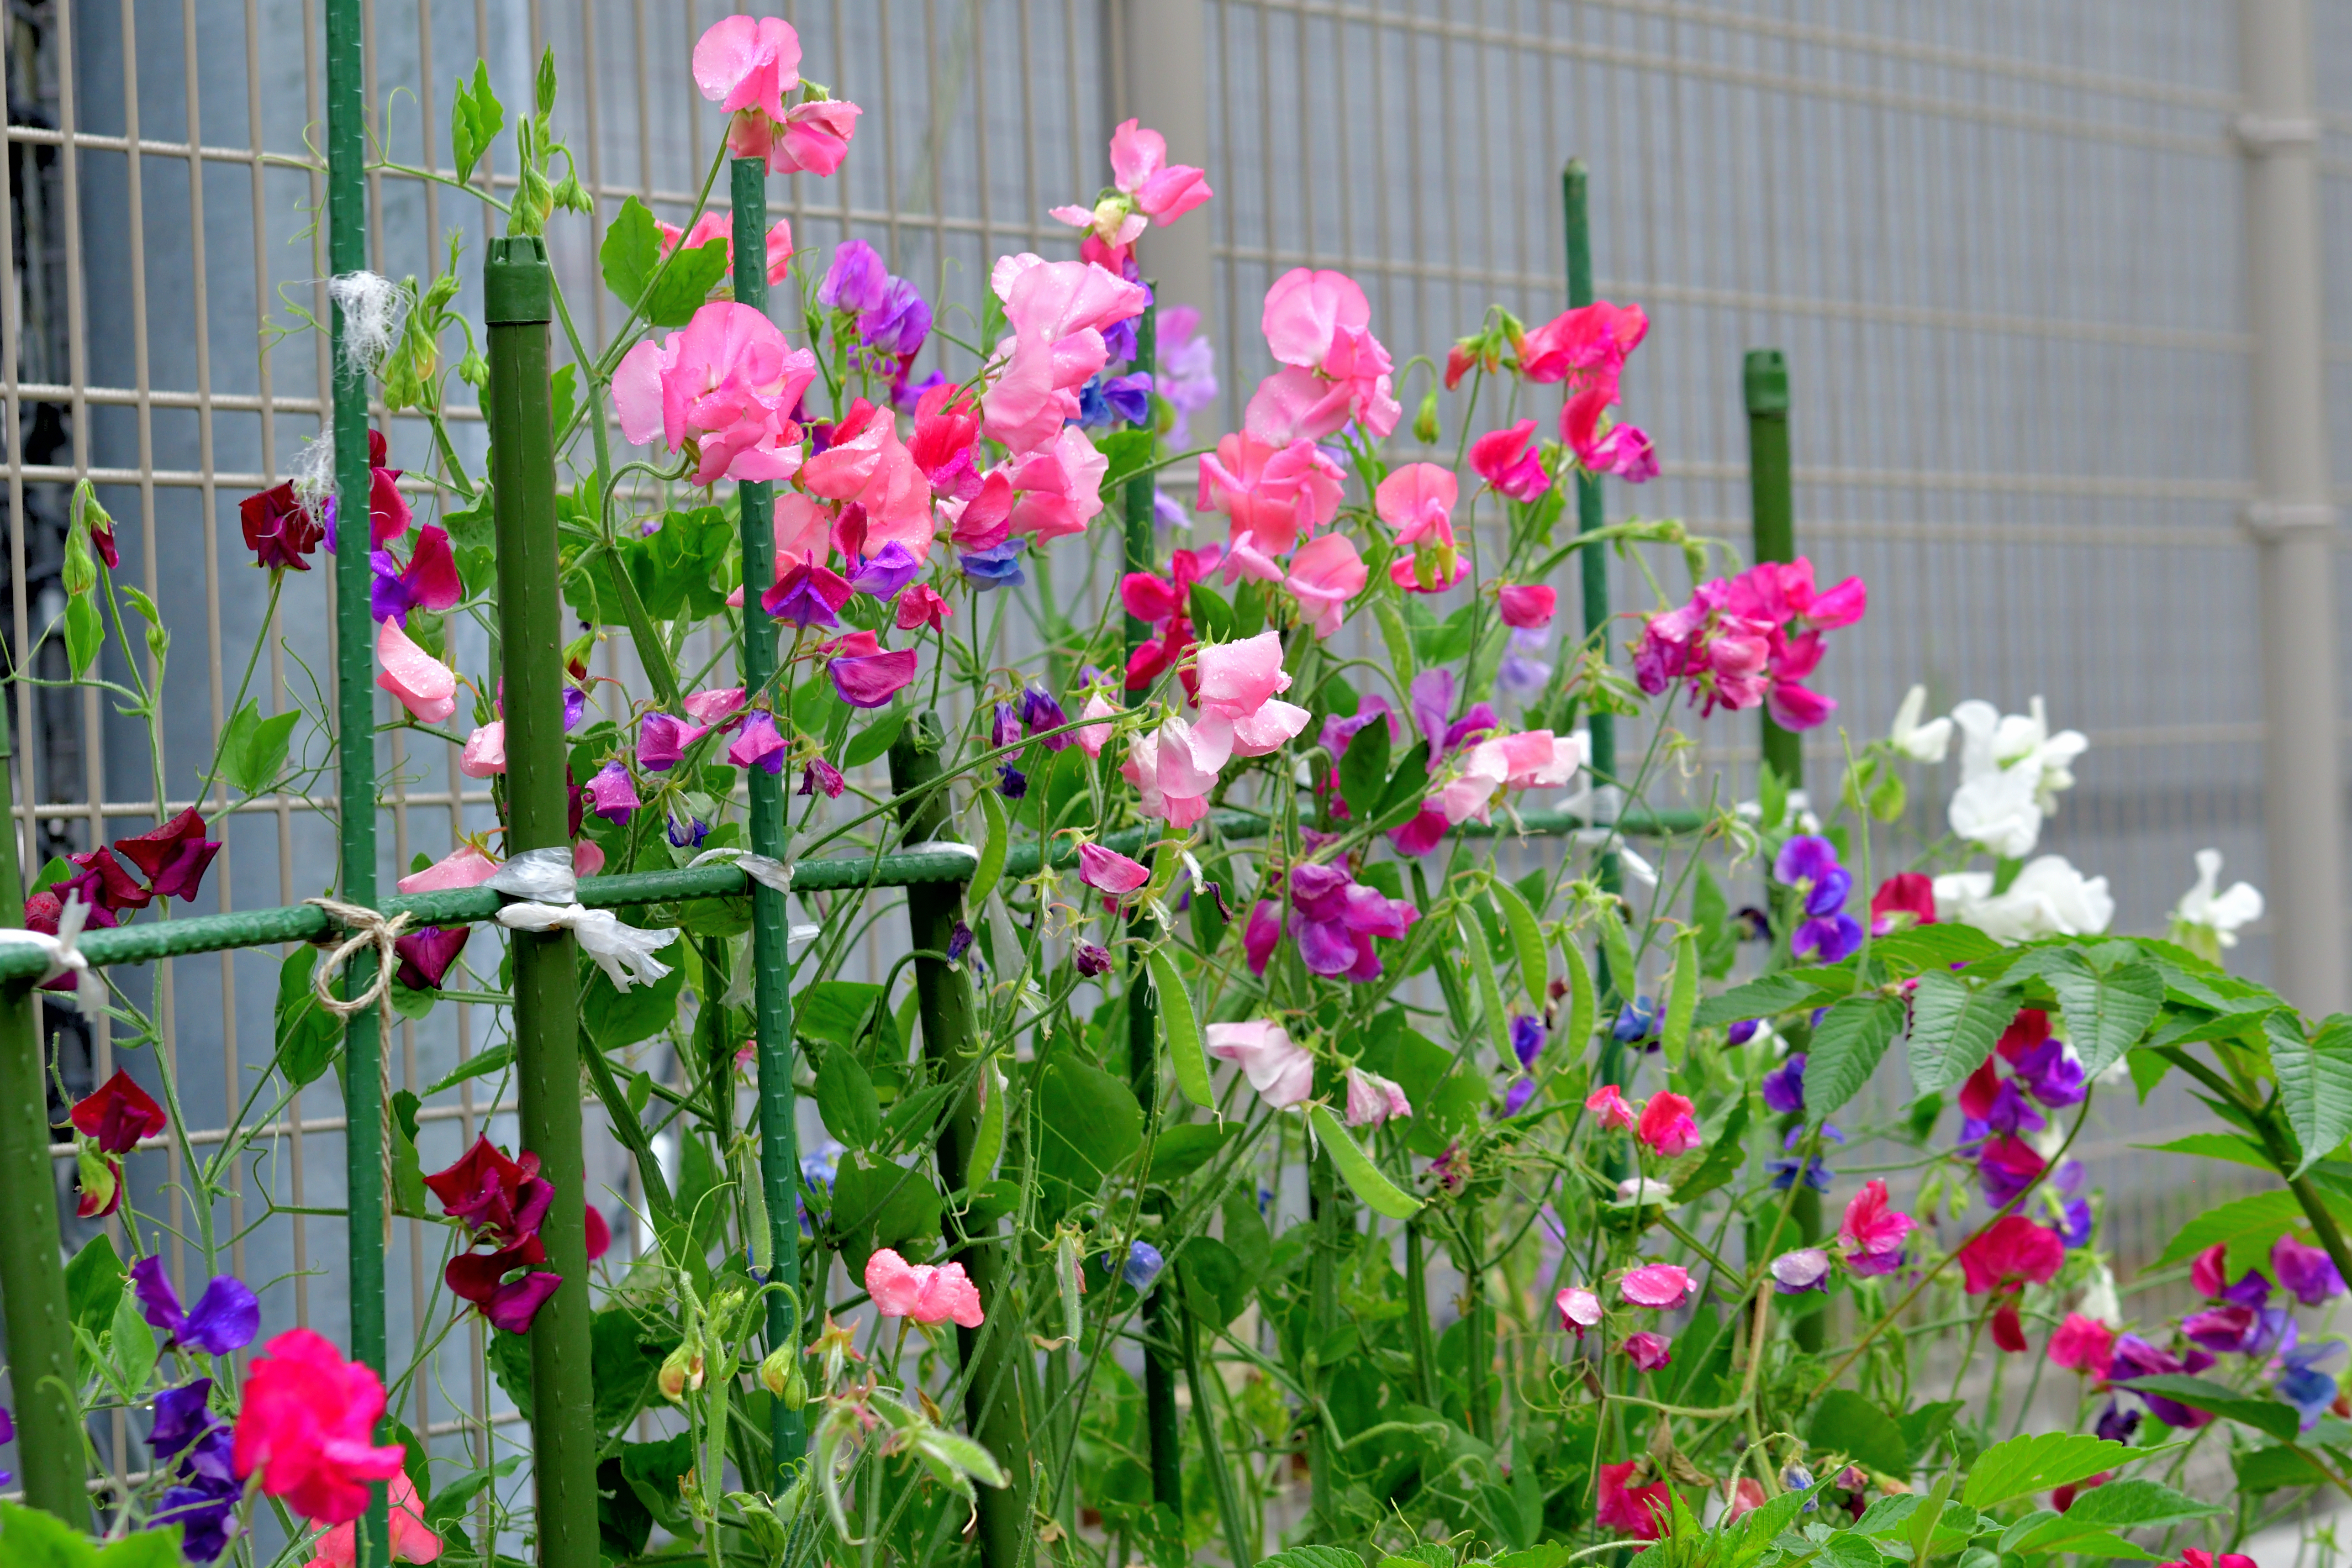 A fence of sweet peas